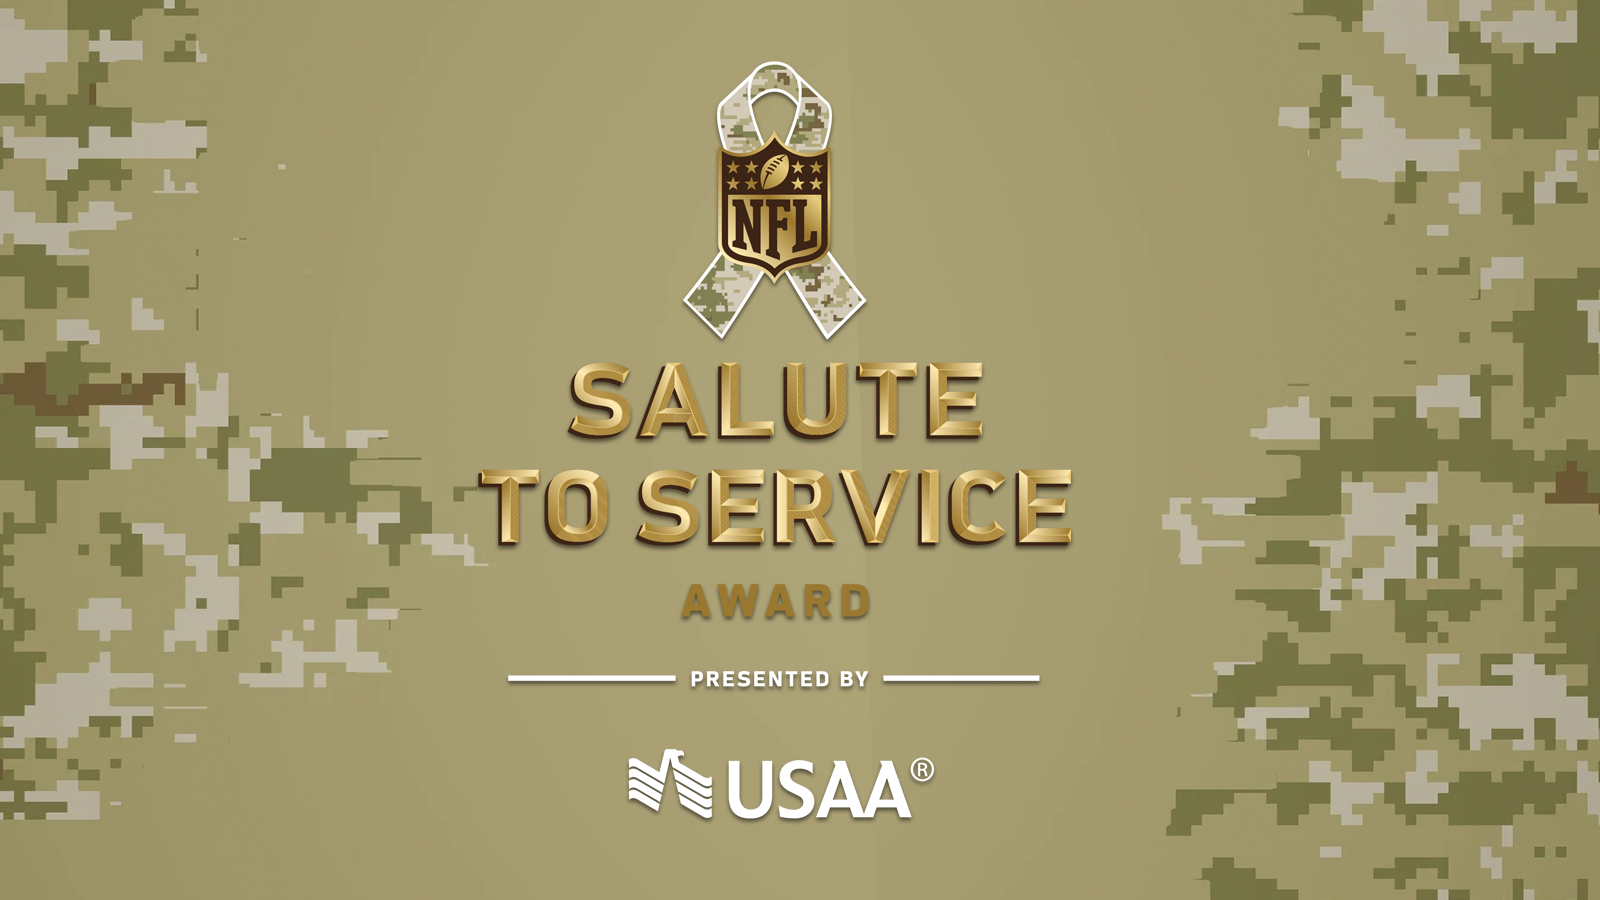 NFL and USO announce Salute to Service Showdown